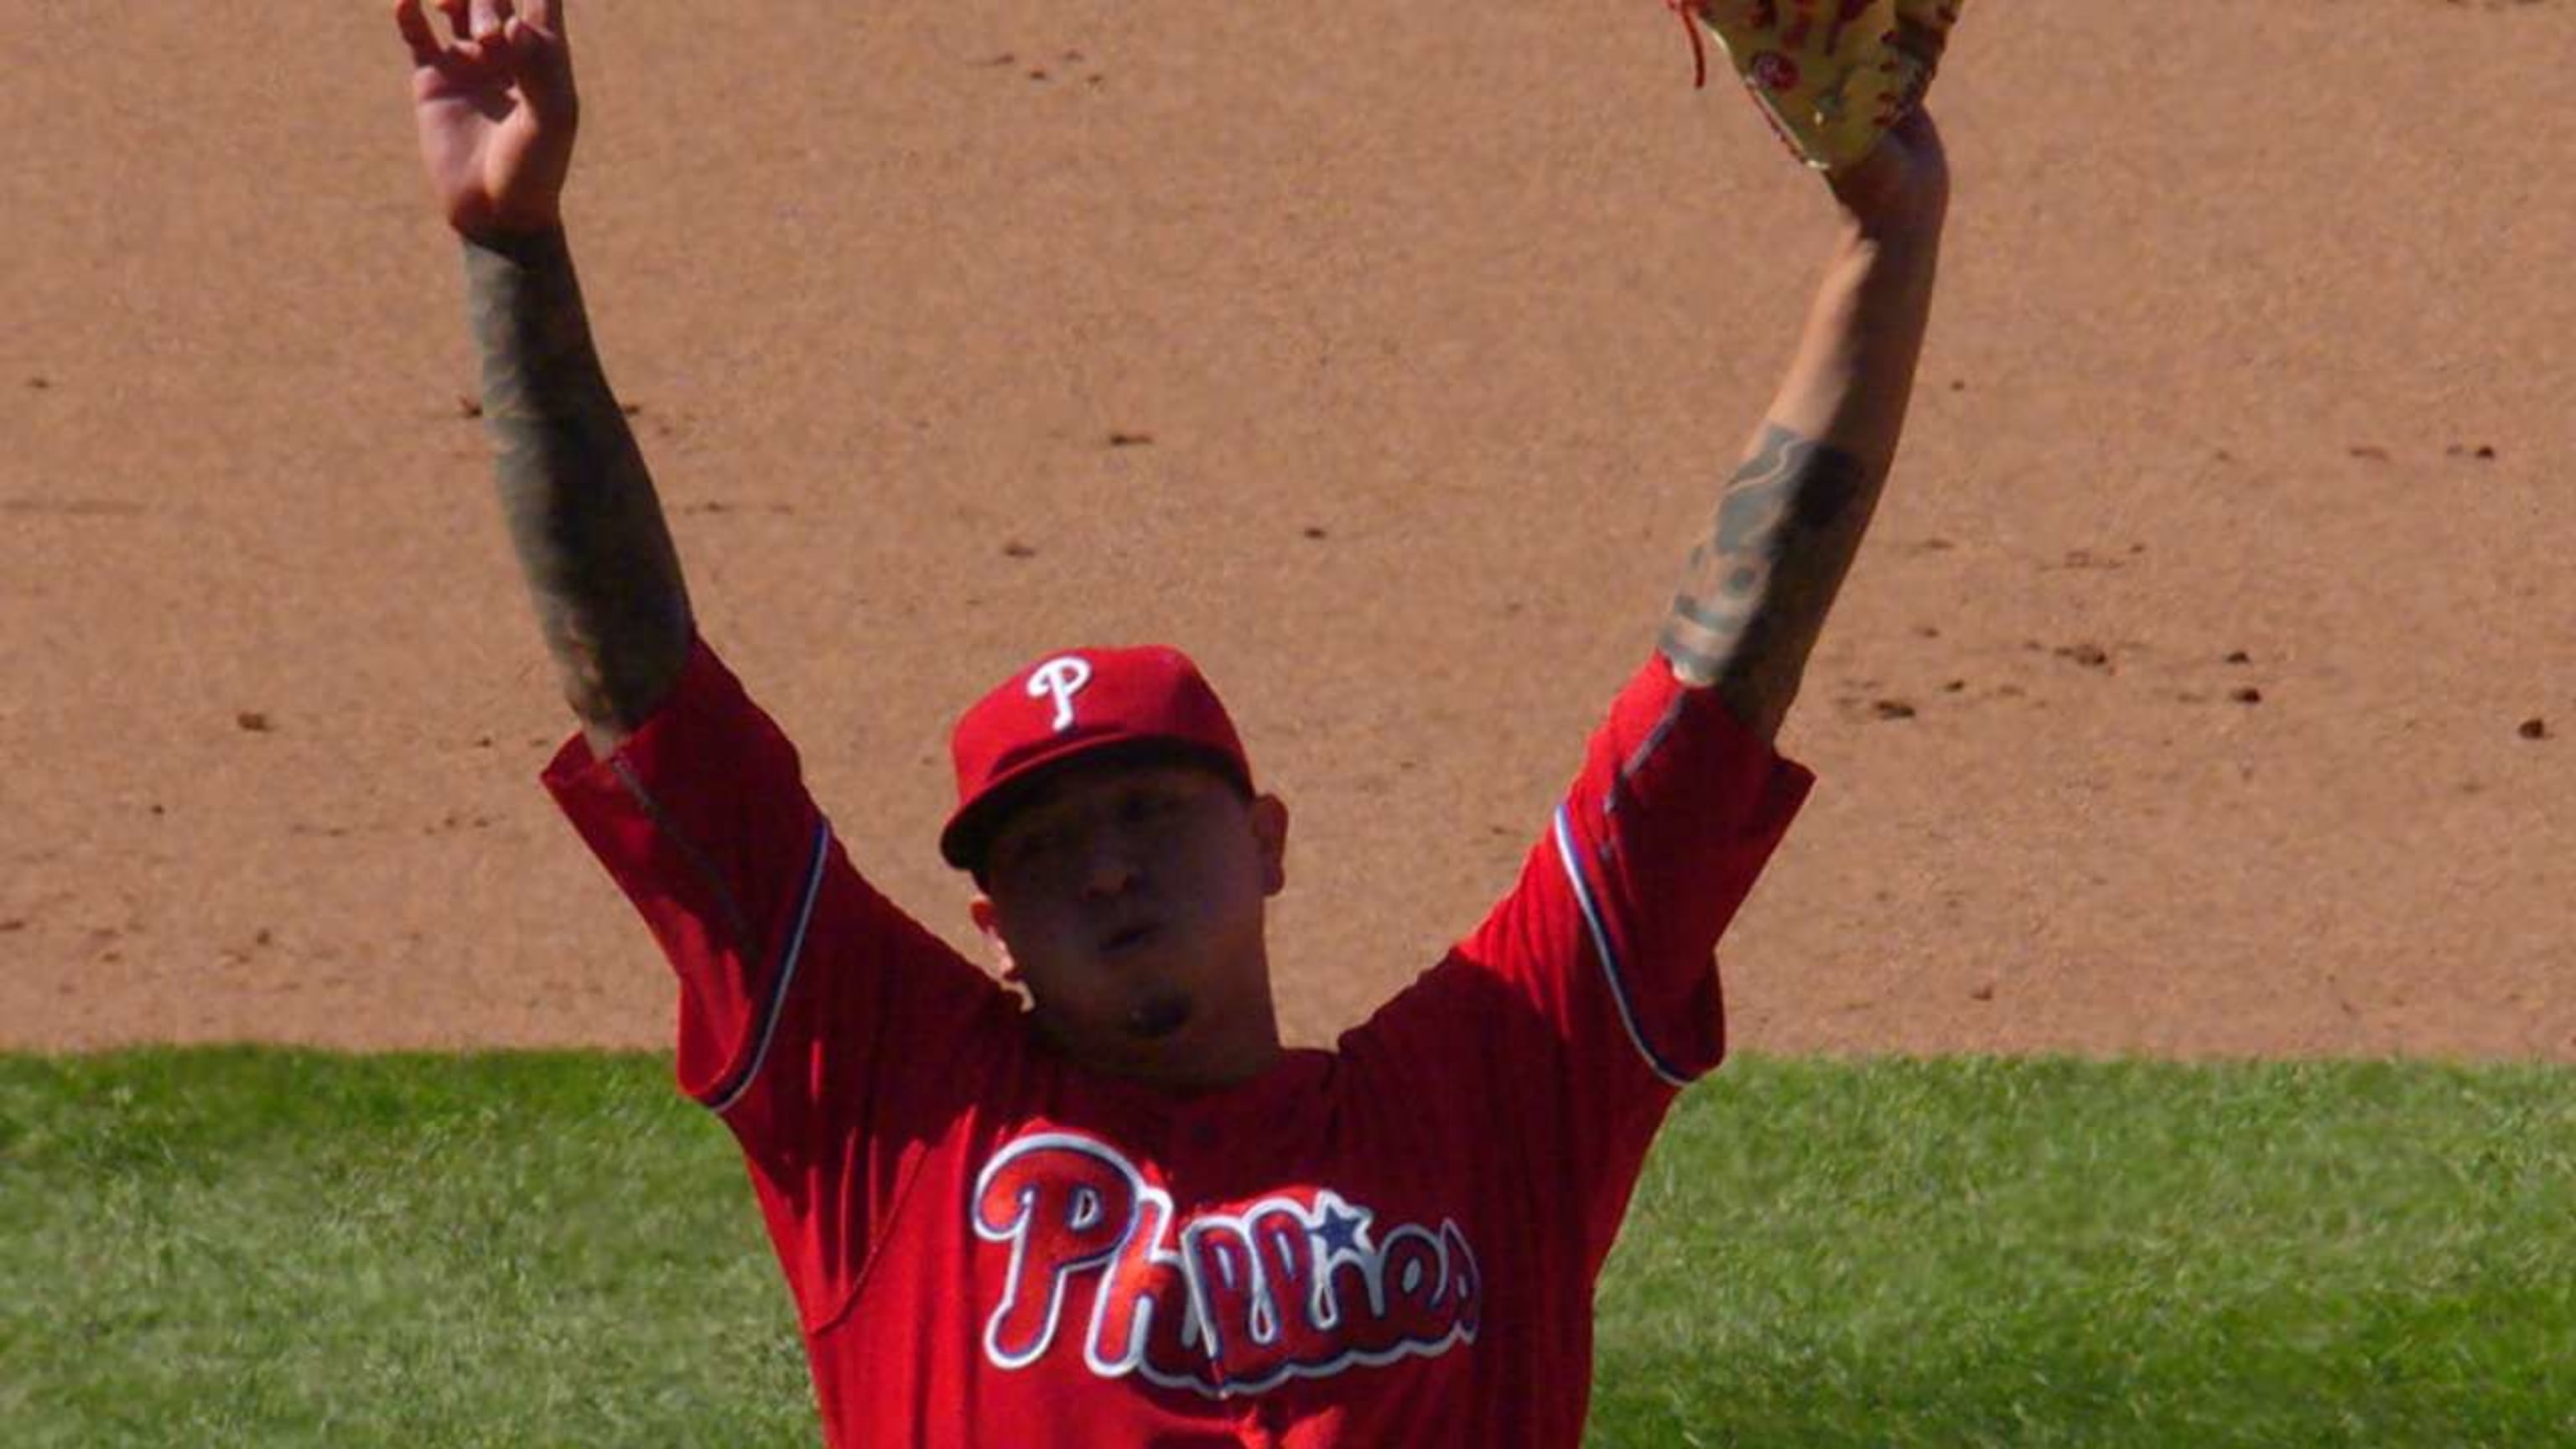 I would love to': Vince Velasquez speaks for first time since